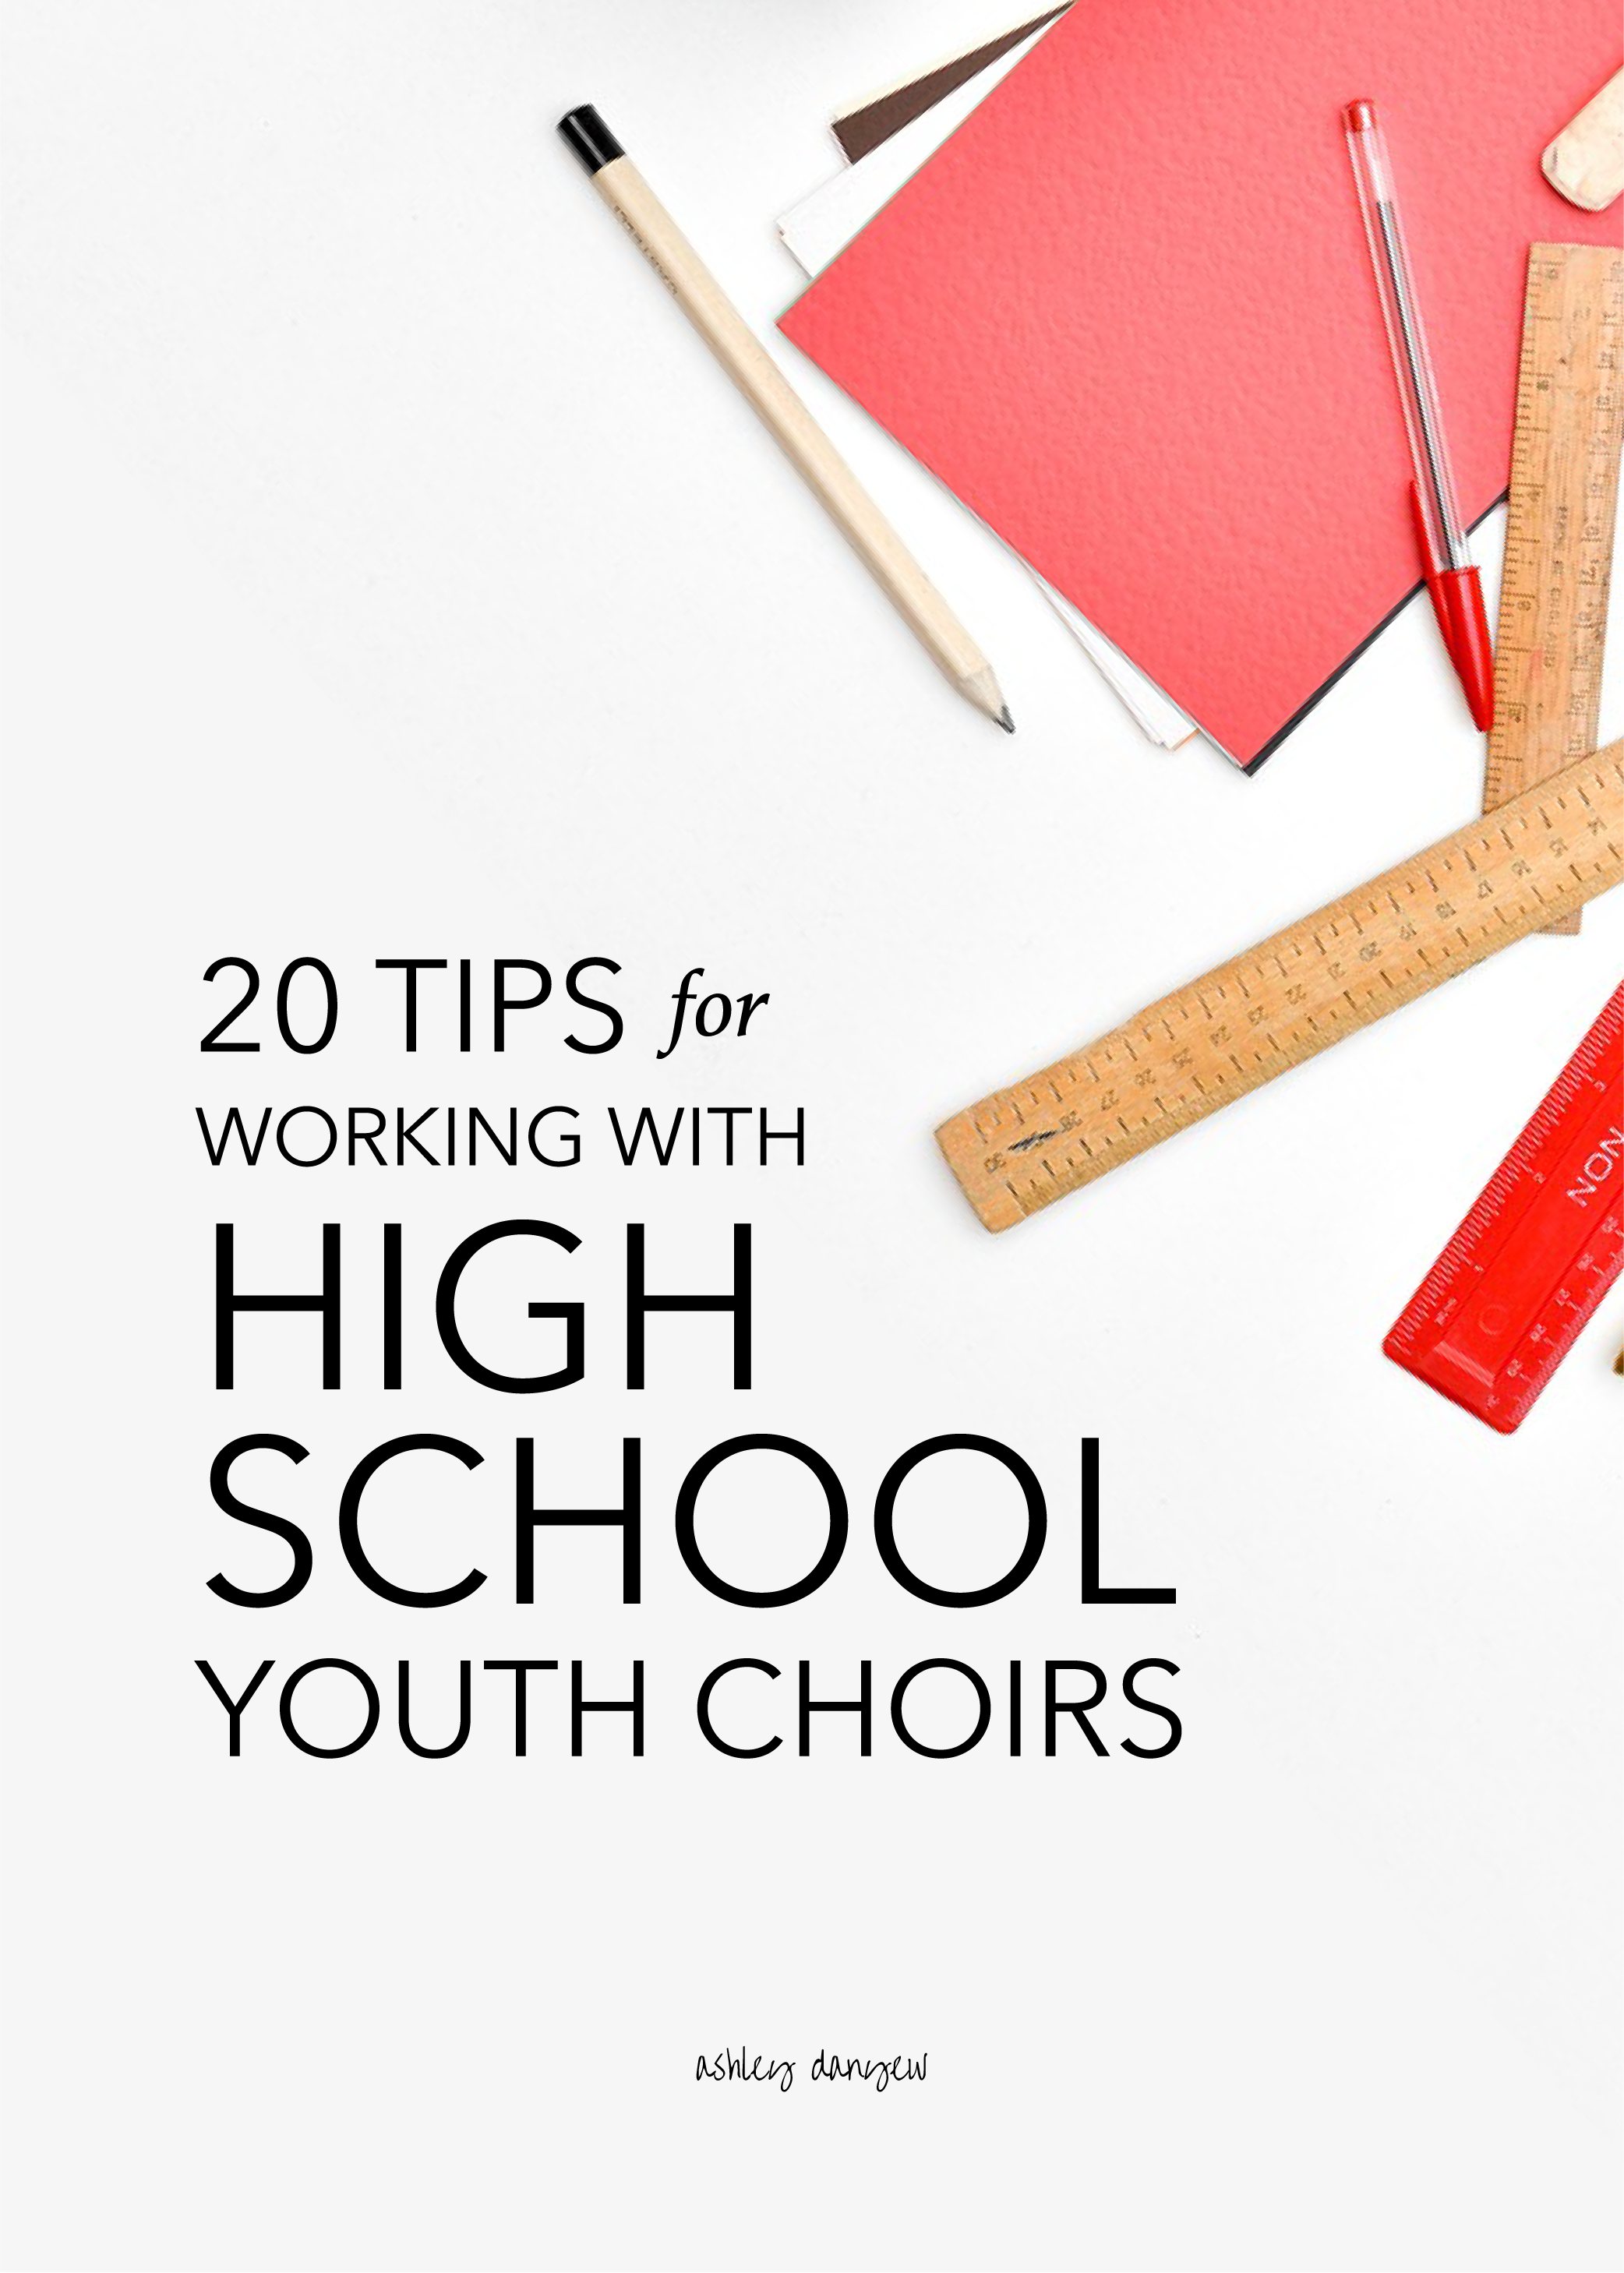 20 Tips for Working with High School Youth Choirs